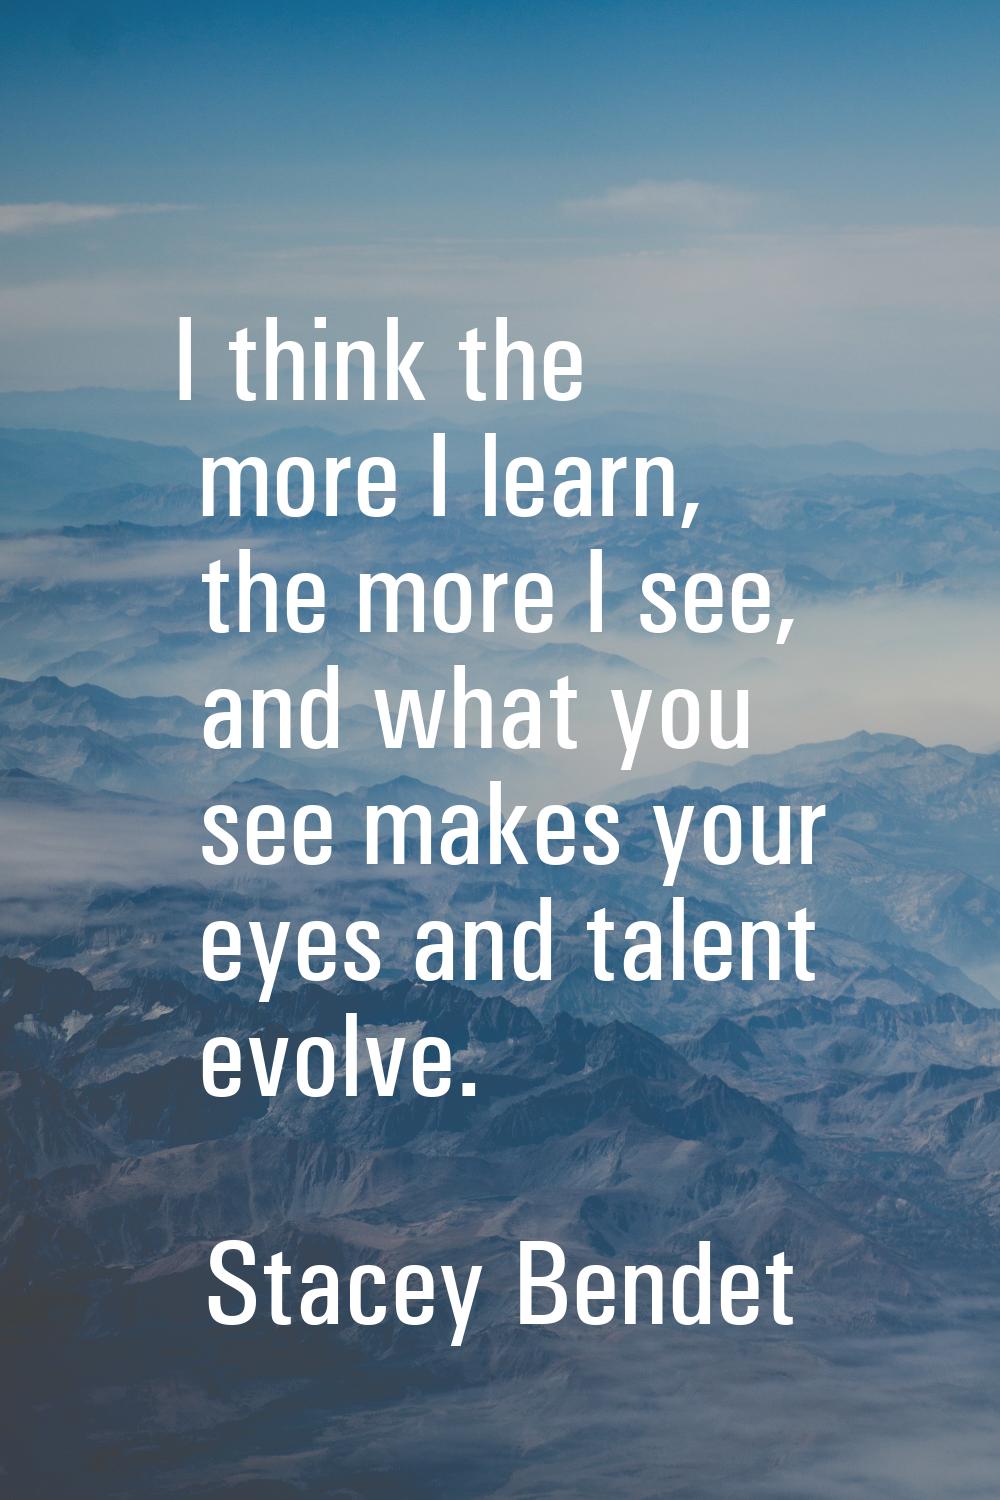 I think the more I learn, the more I see, and what you see makes your eyes and talent evolve.